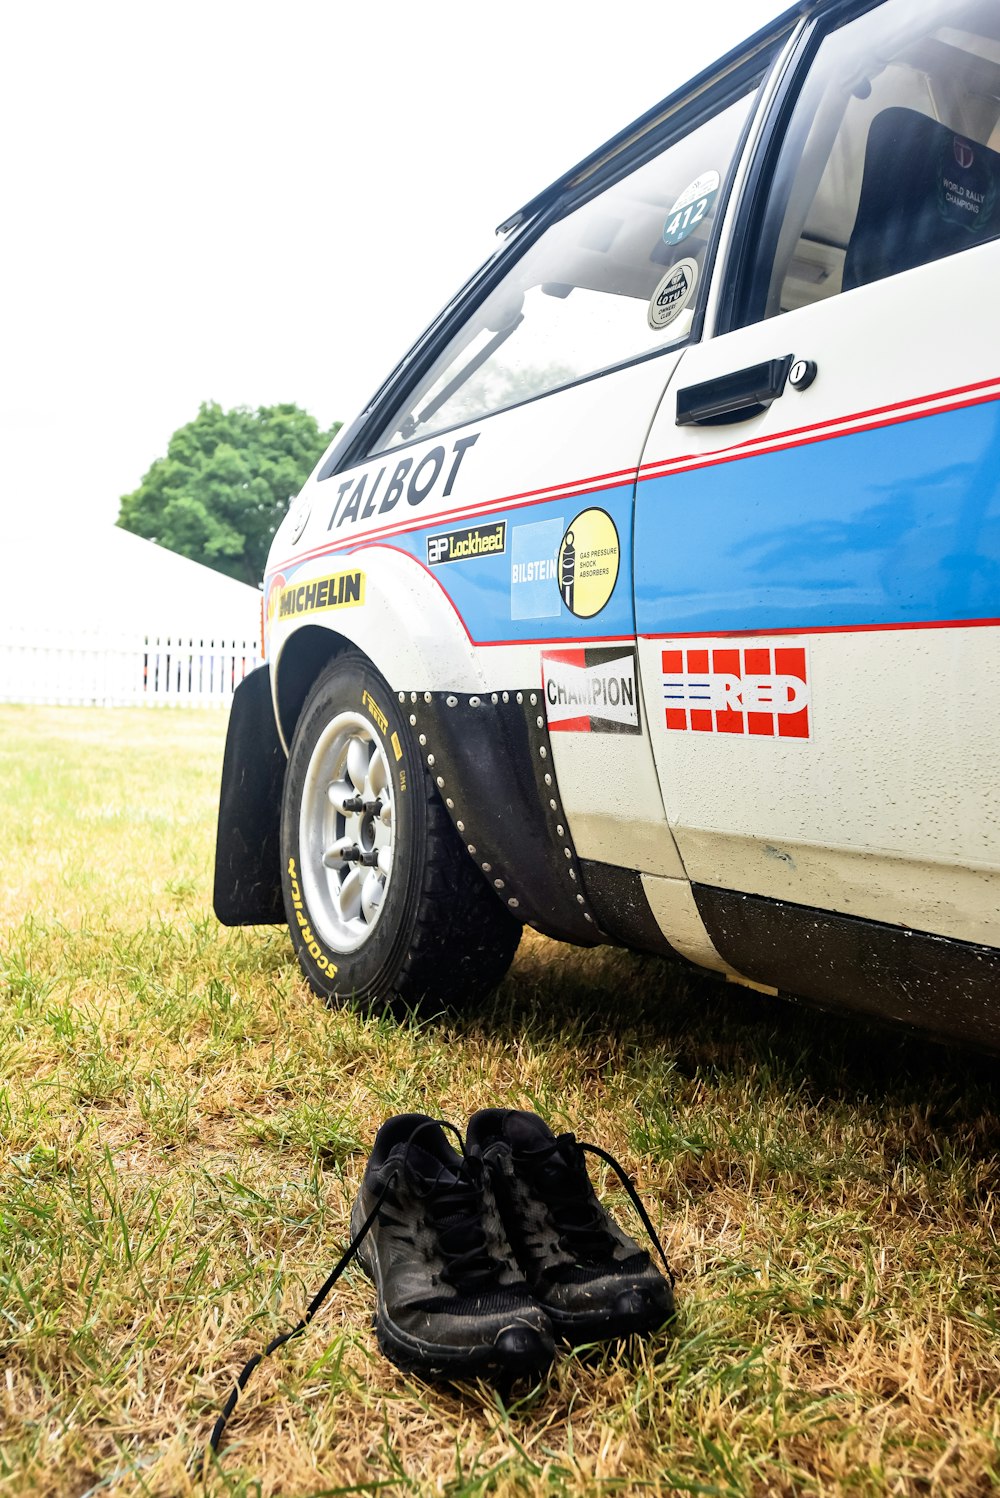 a police car parked in a grassy field